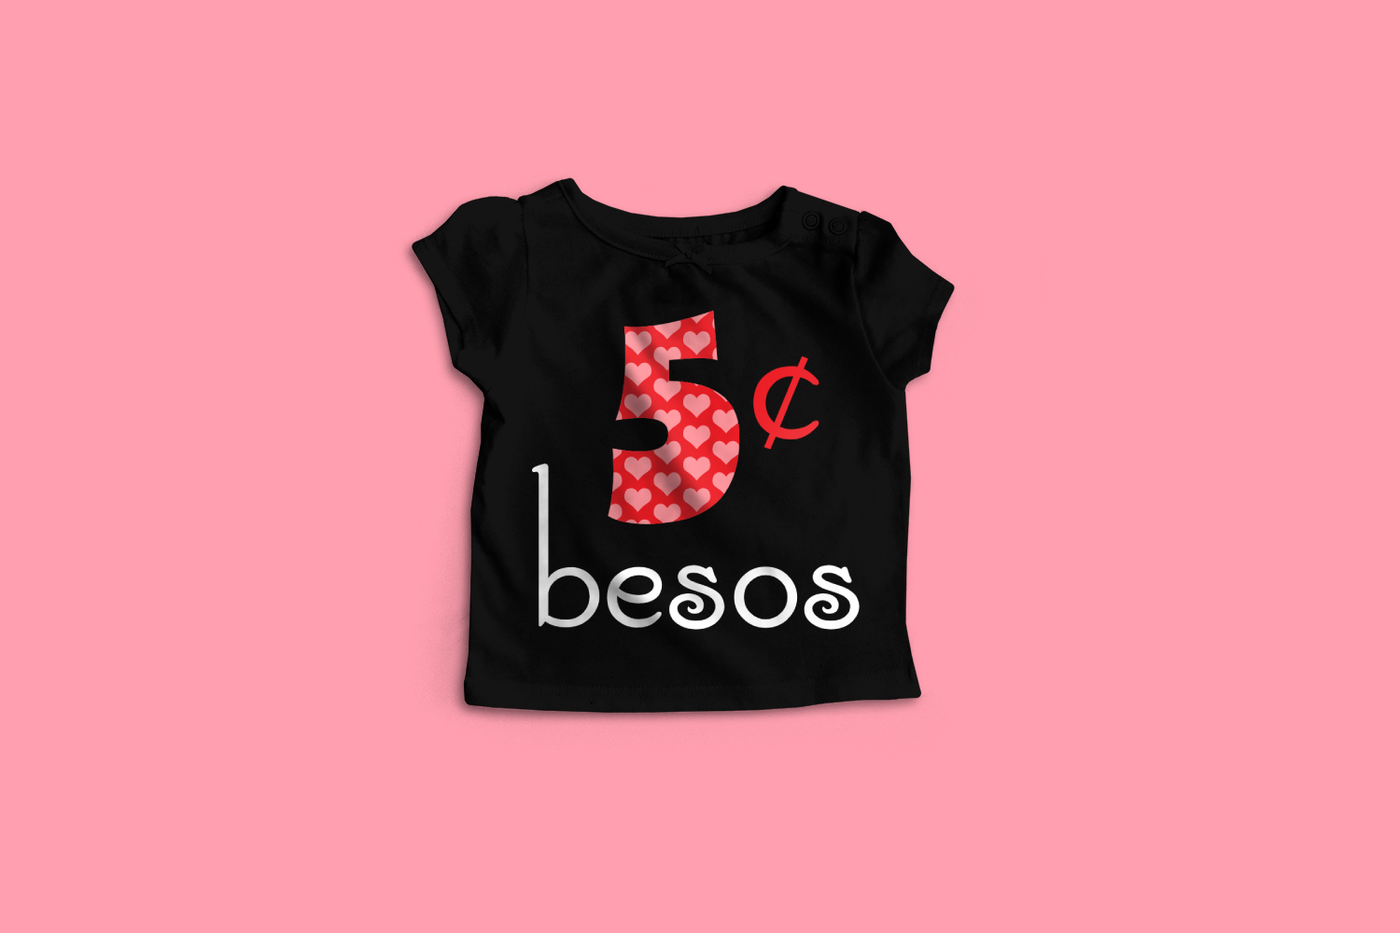 A black child's shirt on a pink backdrop. The shirt has a large 5 with a heart pattern and the cent symbol next to it and word "besos" below.